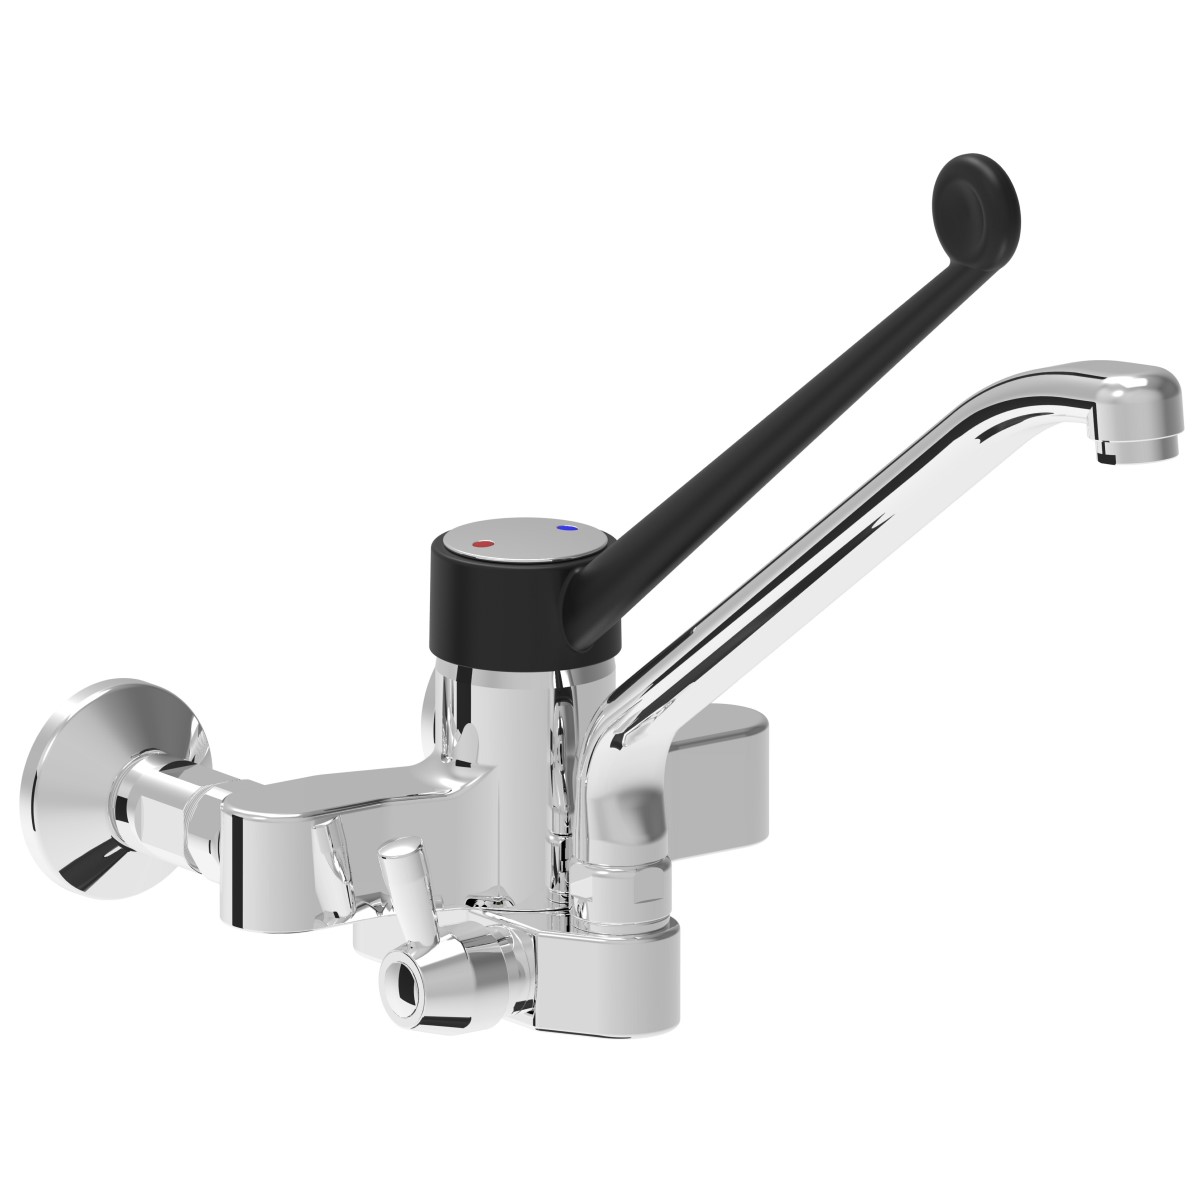 Two holes long lever wall mounted mixer tap attachment to shower units